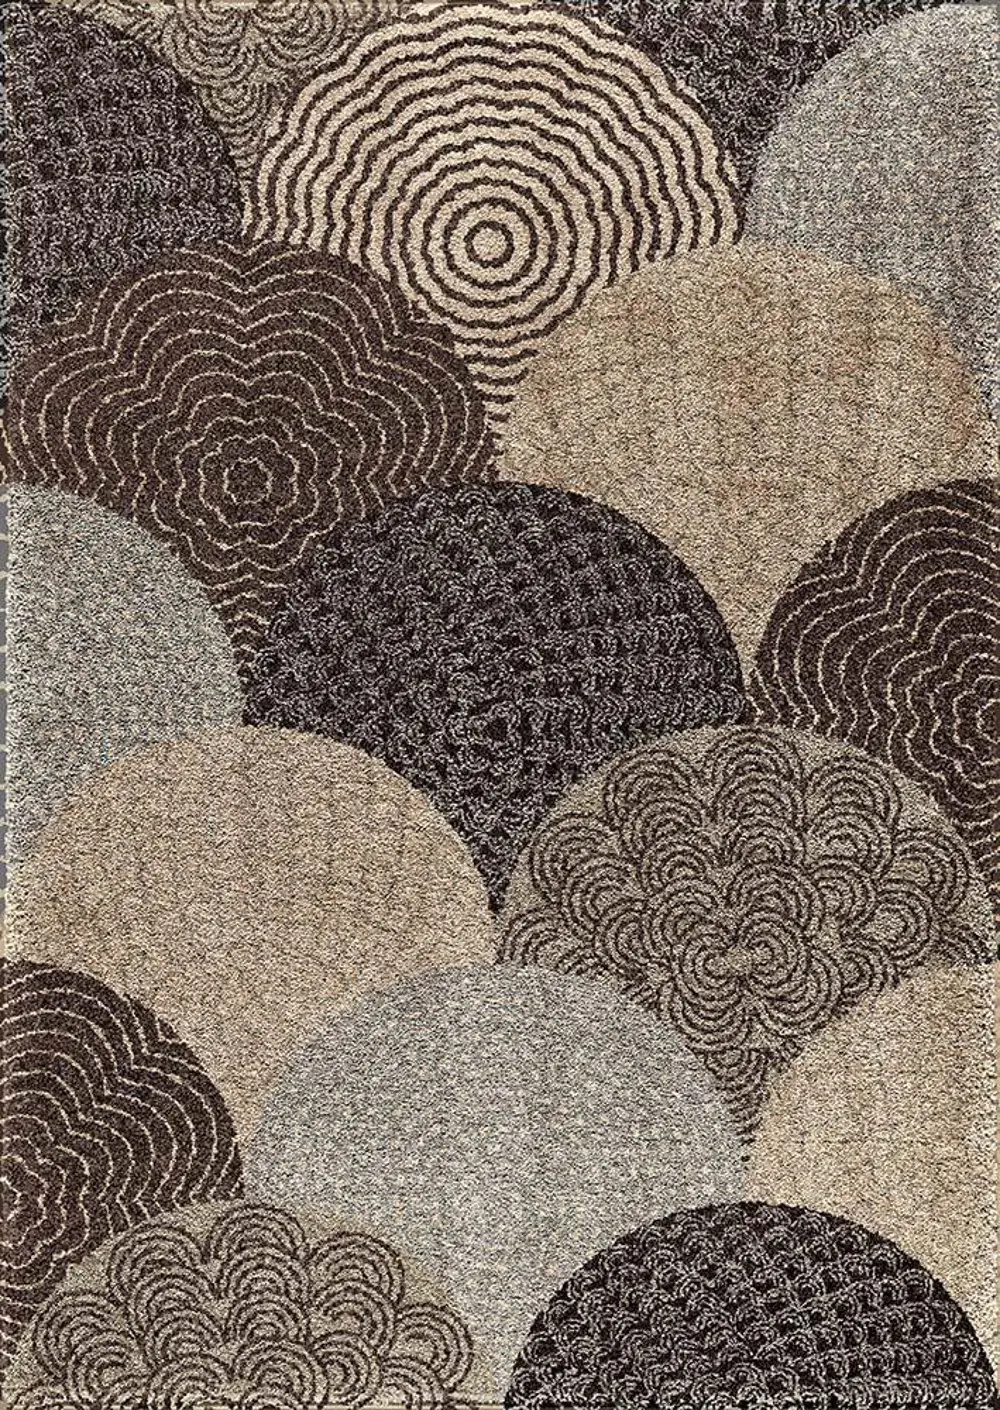 WILDWEAVE/1650...7 8 x 11 Large Taupe Area Rug - Wild Weave-1